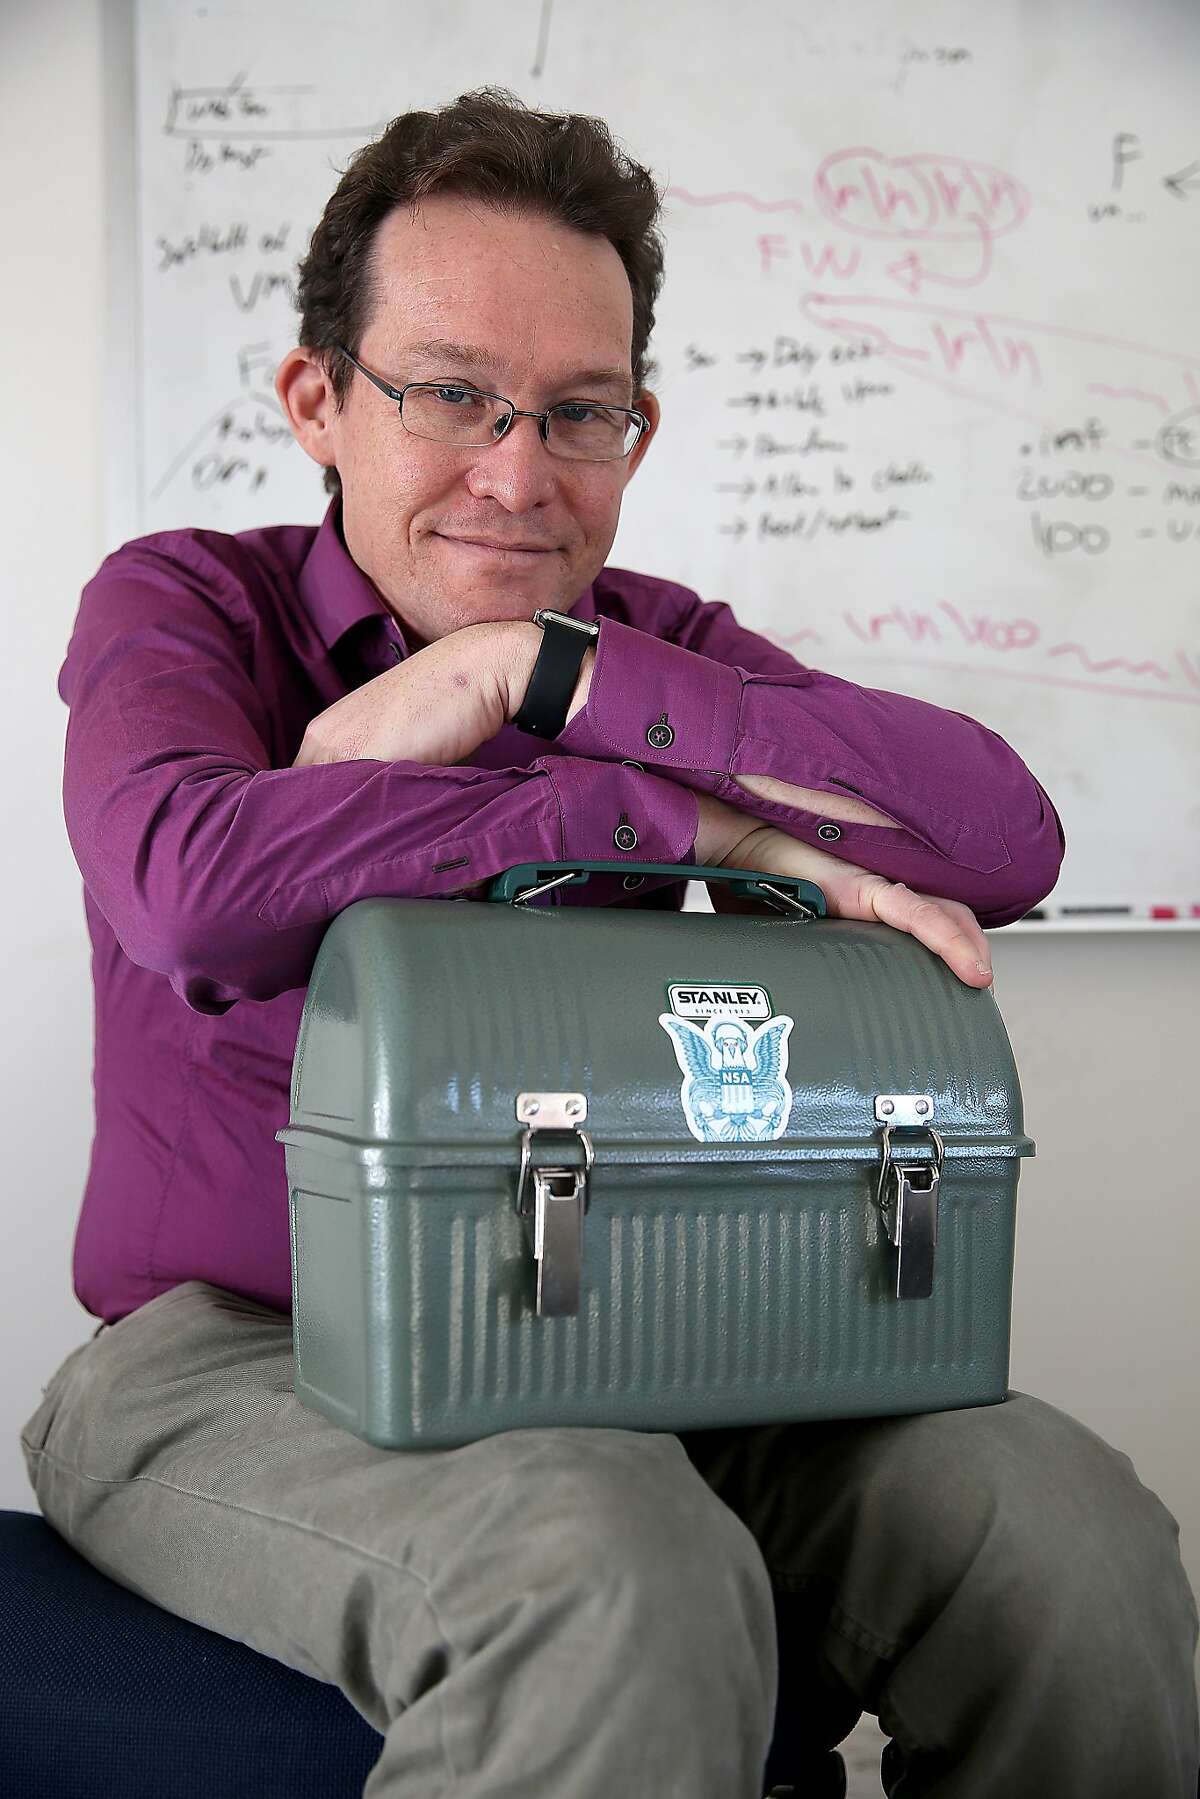 Nicholas Weaver talks about the Intrusion Detection system in his lunchbox that he's built at his office in Berkeley, California, on Monday, February 1, 2016. He assigned about twenty students a computer network assignment to build an NSA style surveillance system.